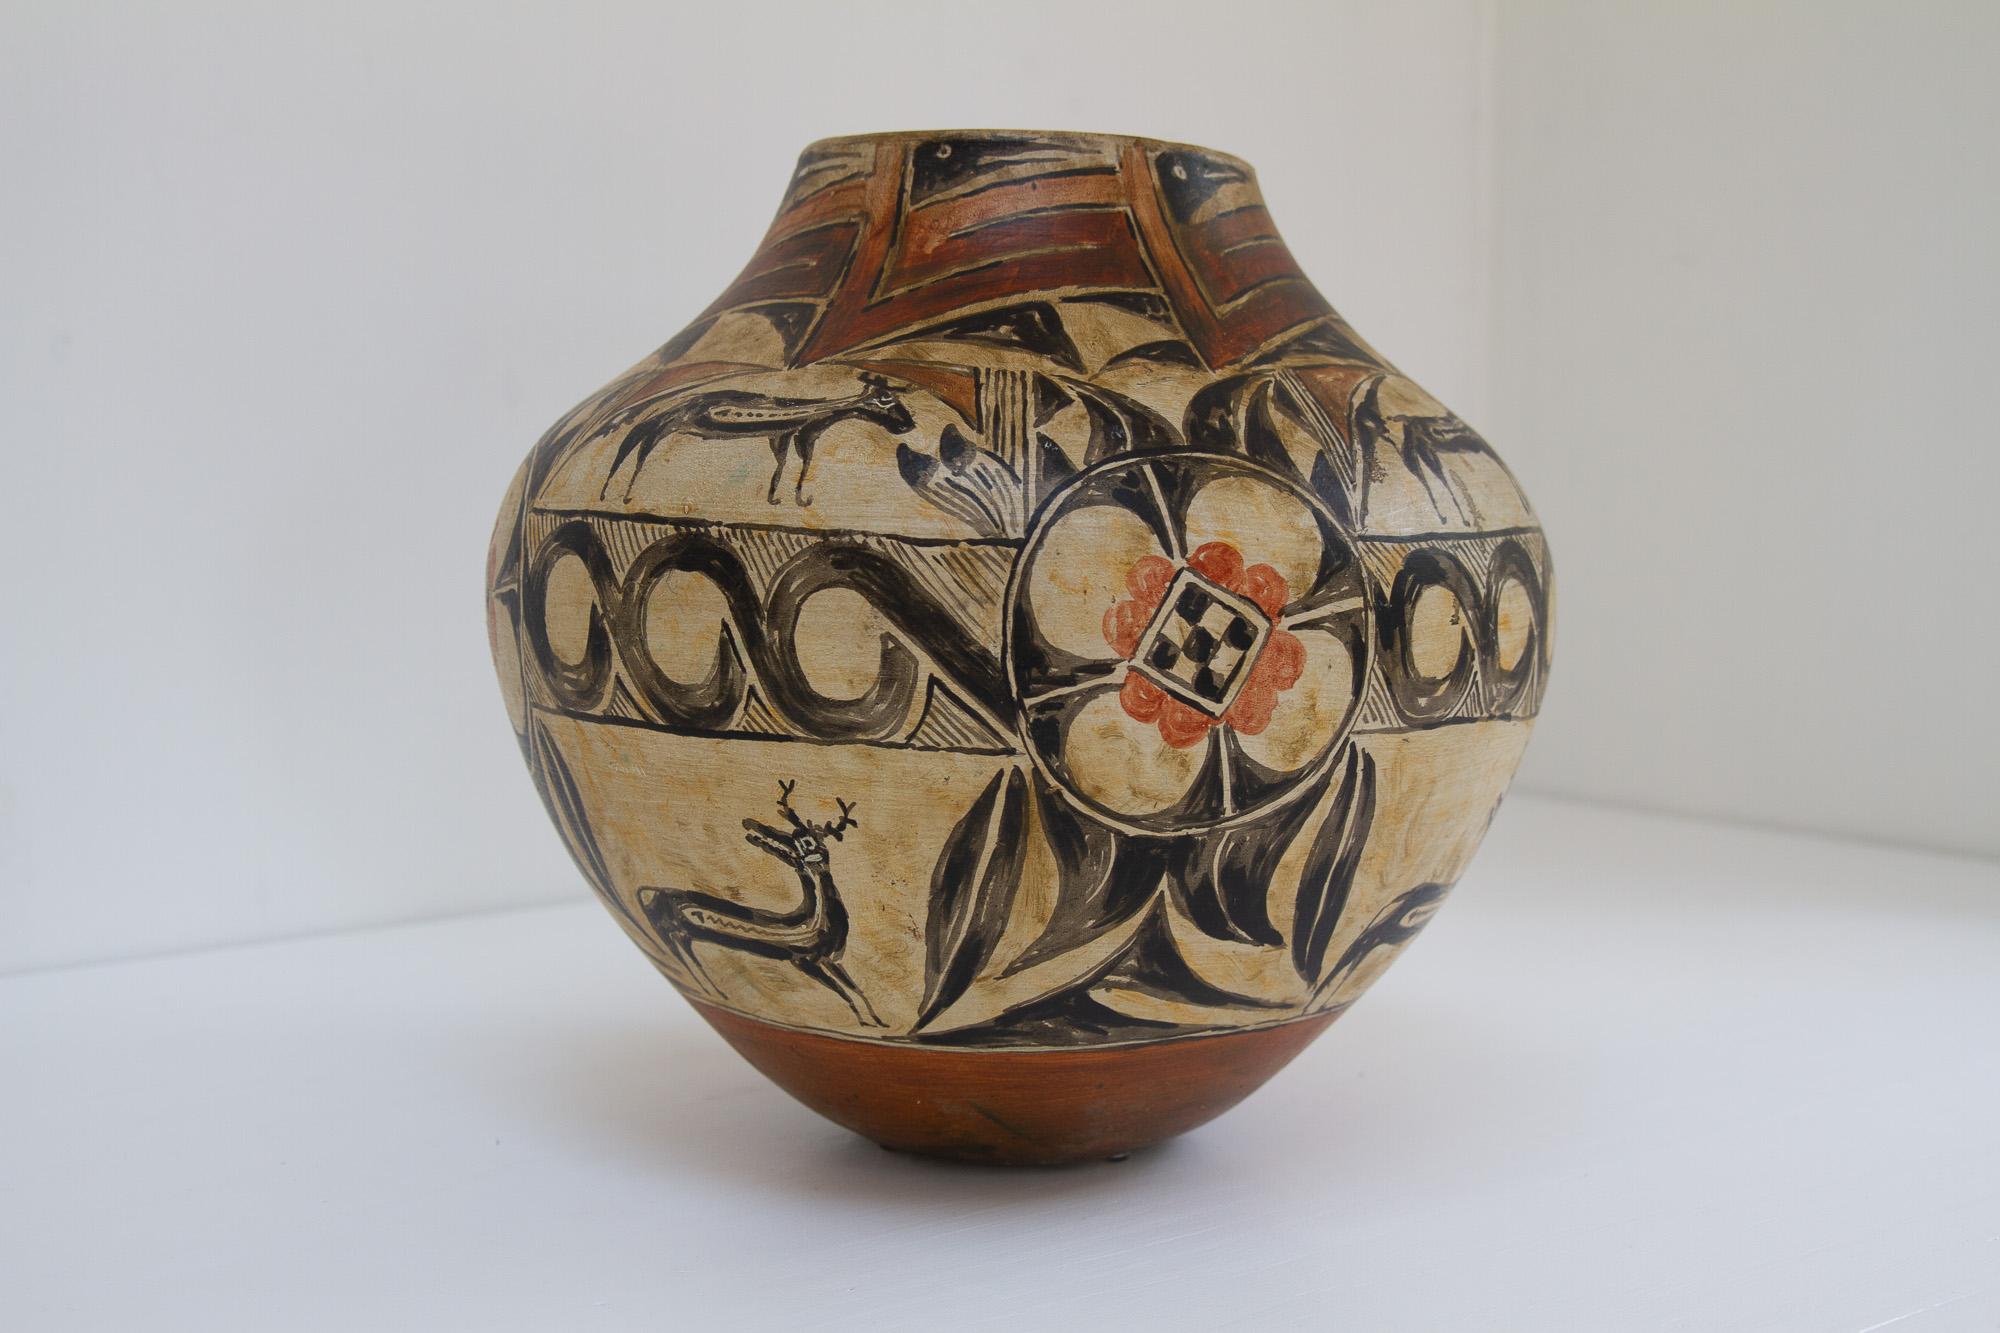 Native American Pueblo Olla Pottery, 1930s.
Large and heavy (7.8 kilograms) storage jar. Polychrome with deer, bird and floral motifs. This vase was bought by a Danish couple travelling to America in the early 20th century, and have been kept in a